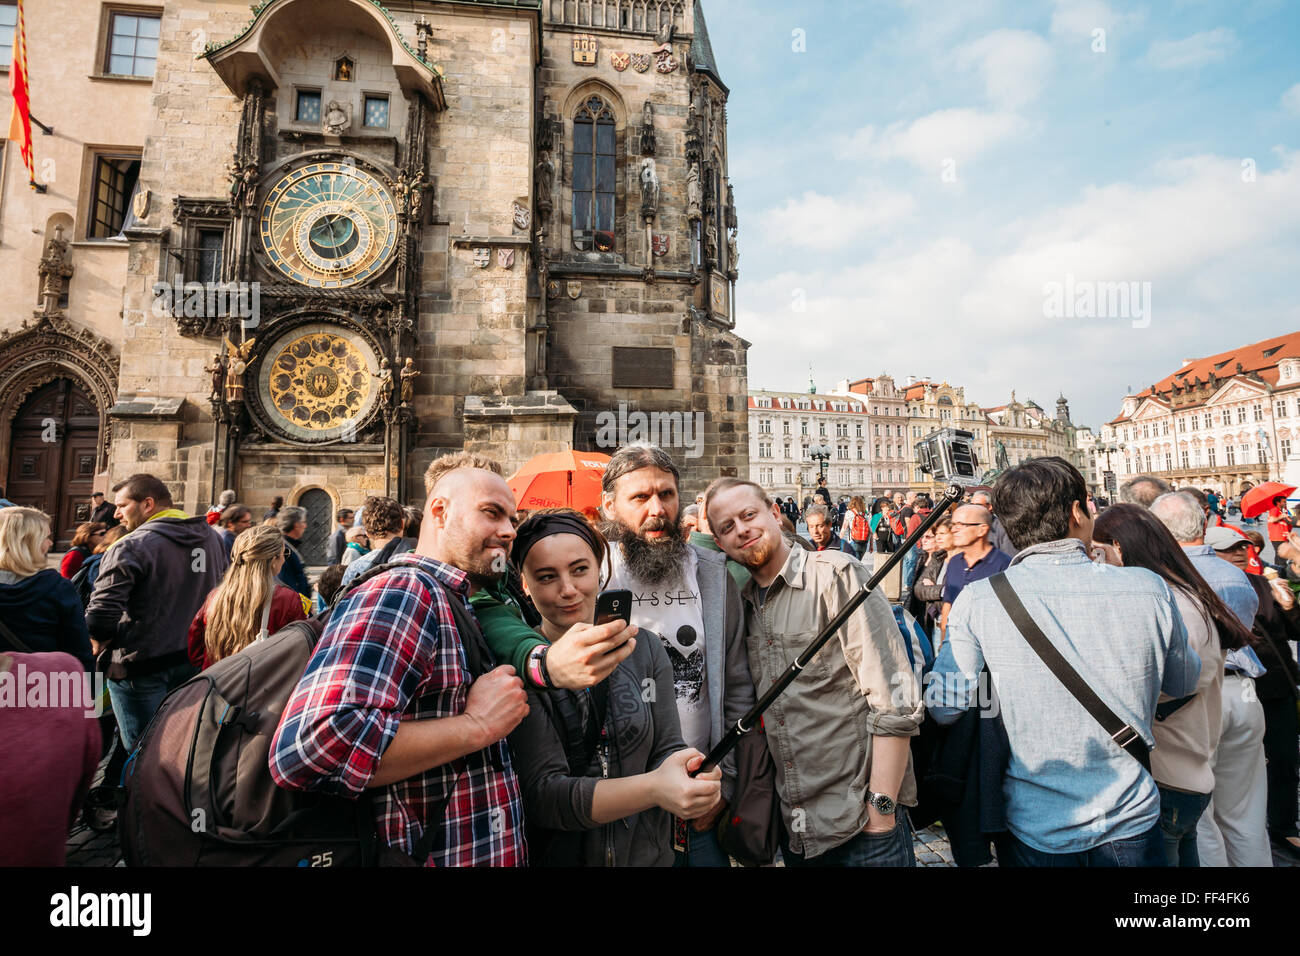 Prague, Czech Republic - October 13, 2014: Group of tourists taking photos, selfie against background of sights - town hall with Stock Photo